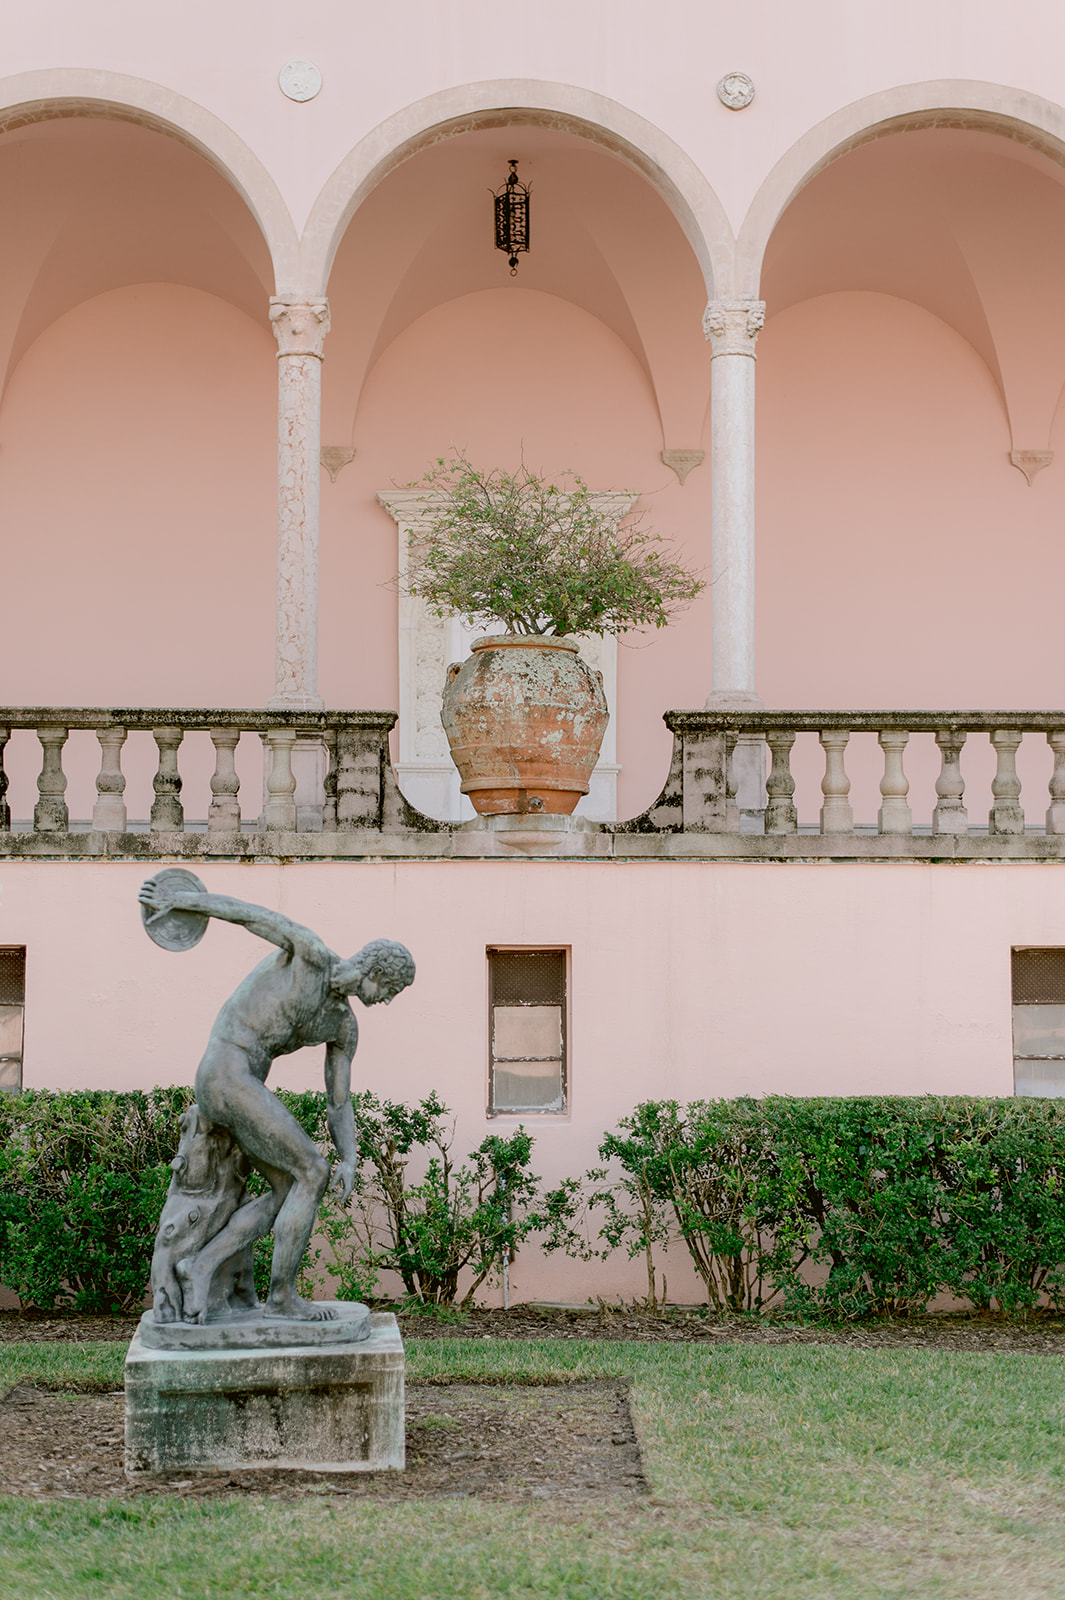 "Indian couple showcasing their love at the Ringling Museum's Ca' d'Zan mansion"
